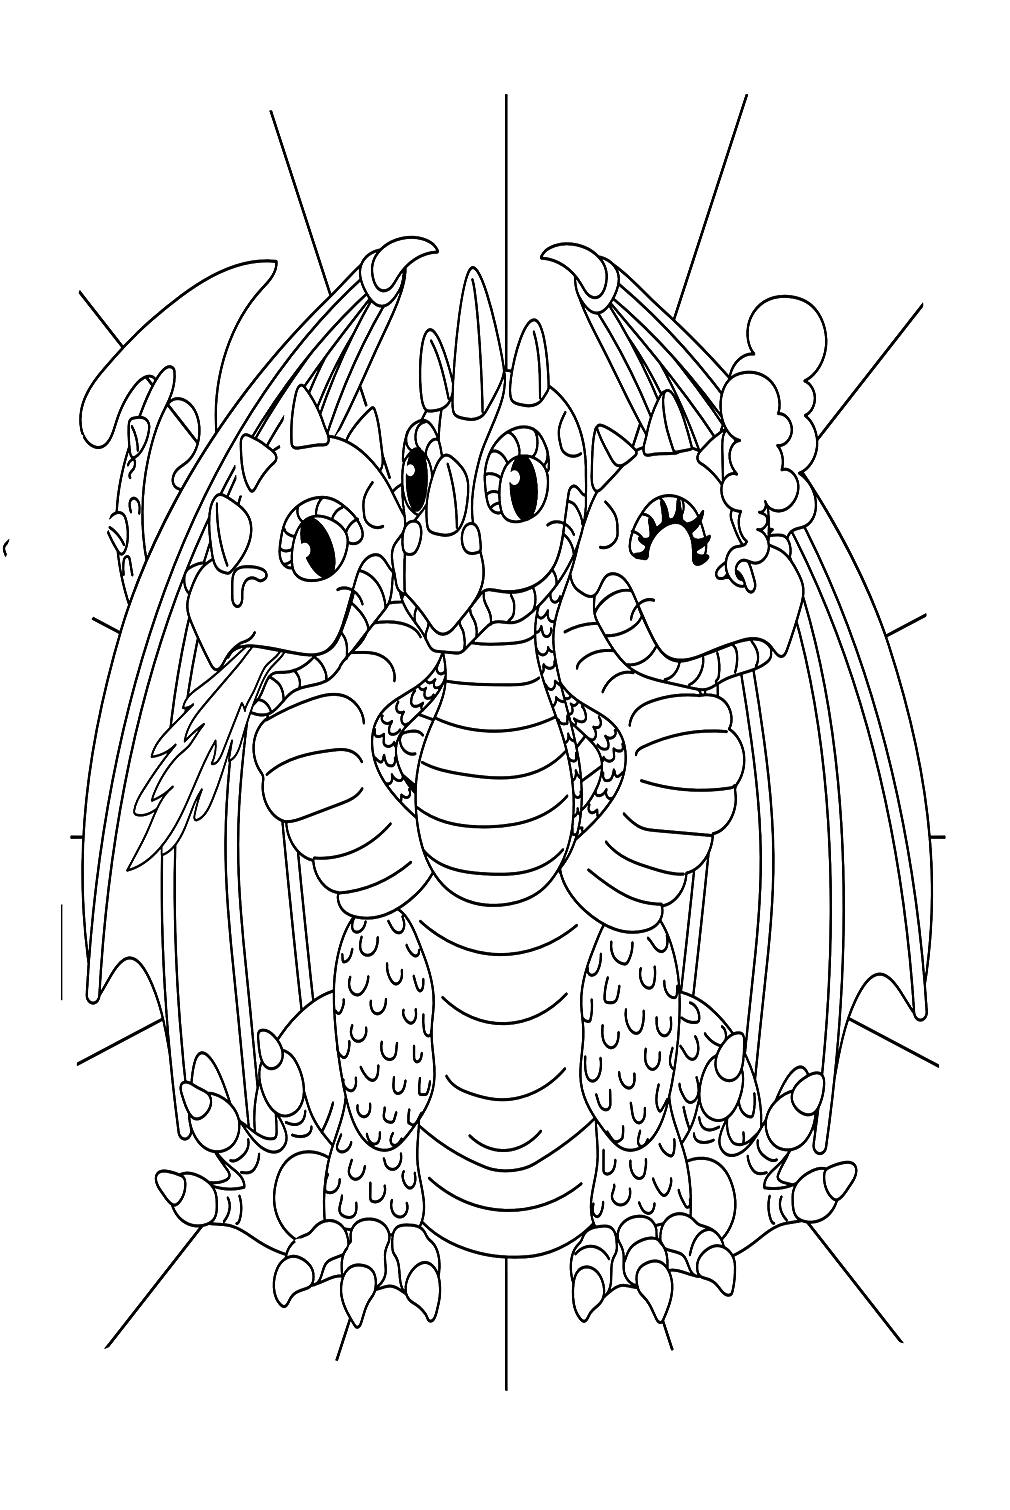 Cartoon Hydra Coloring Page from Hydra